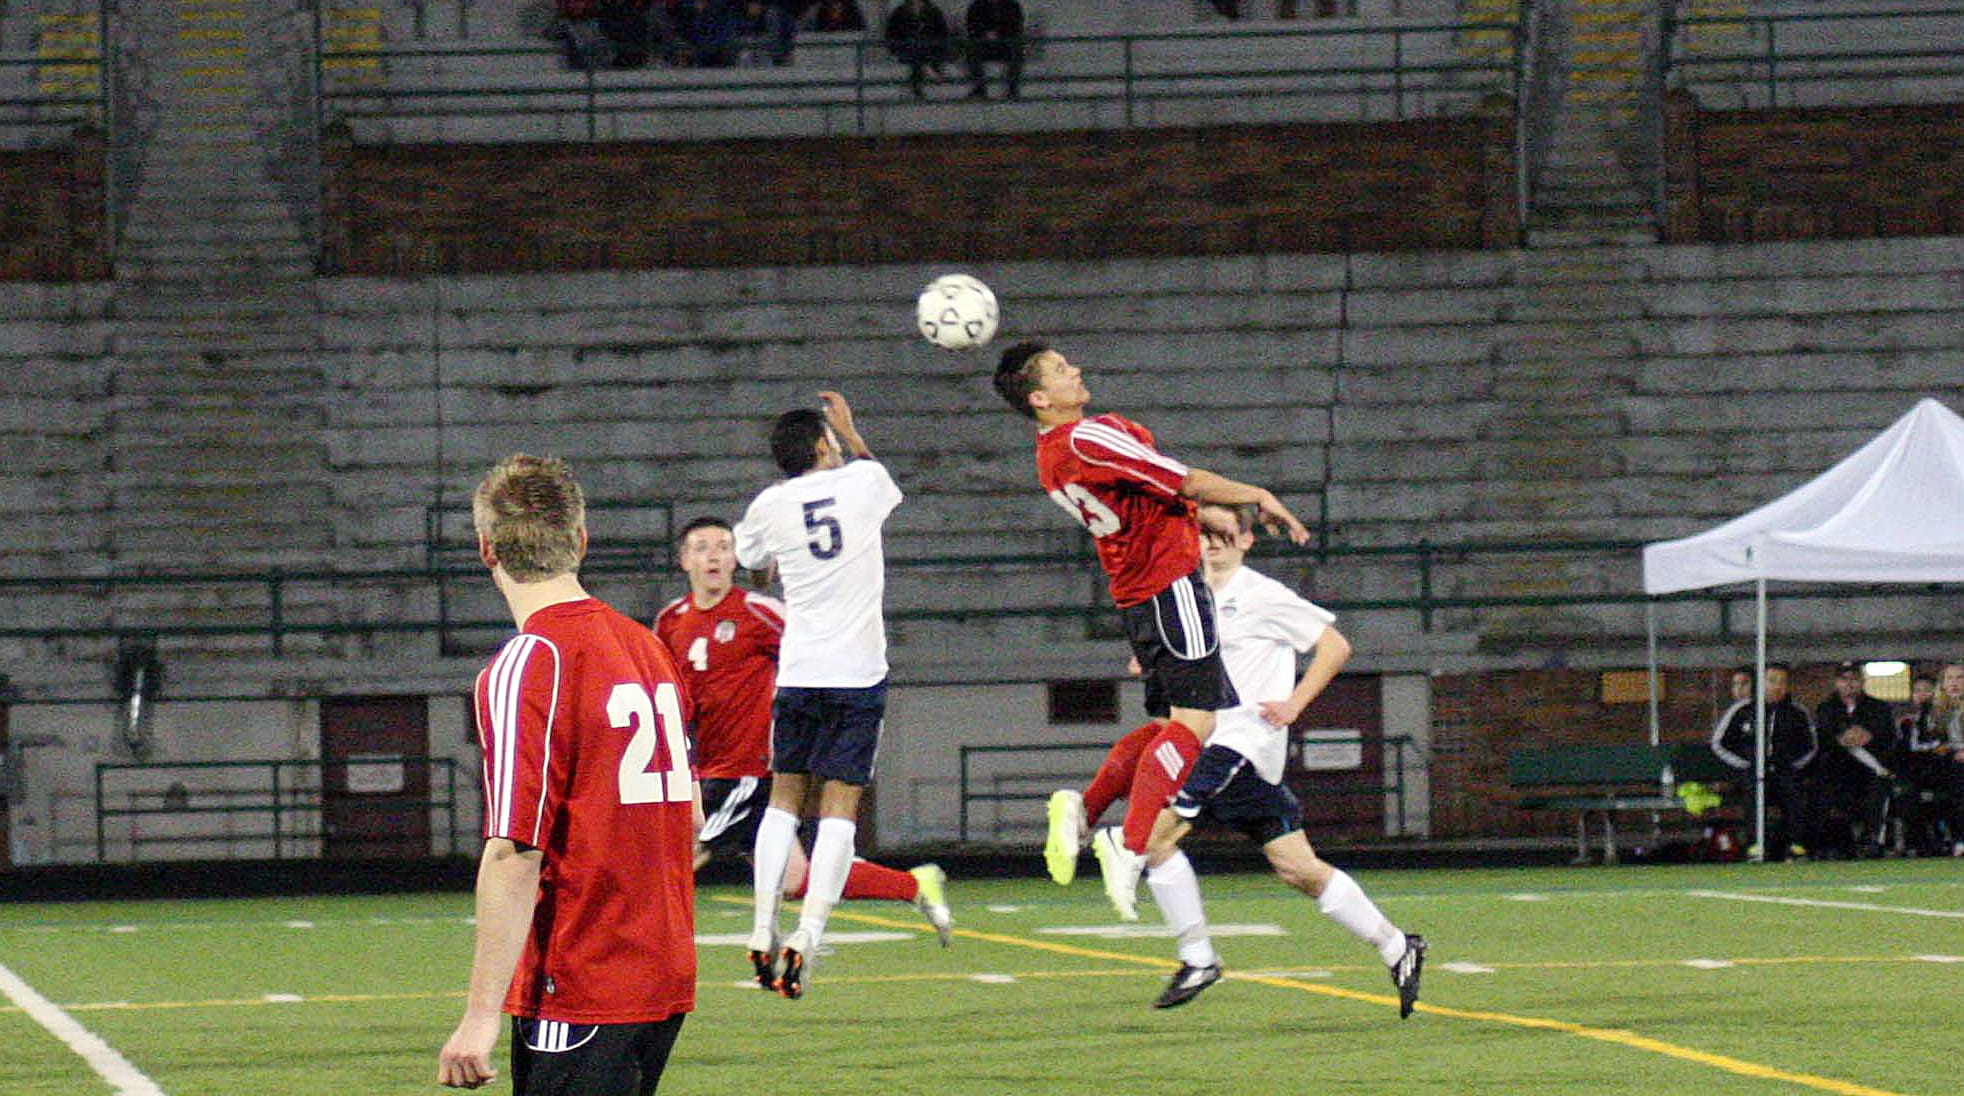 Camas forward Cameron Eyman heads the soccer ball beyond a Skyview defender during overtime April 1, at Kiggins Bowl.